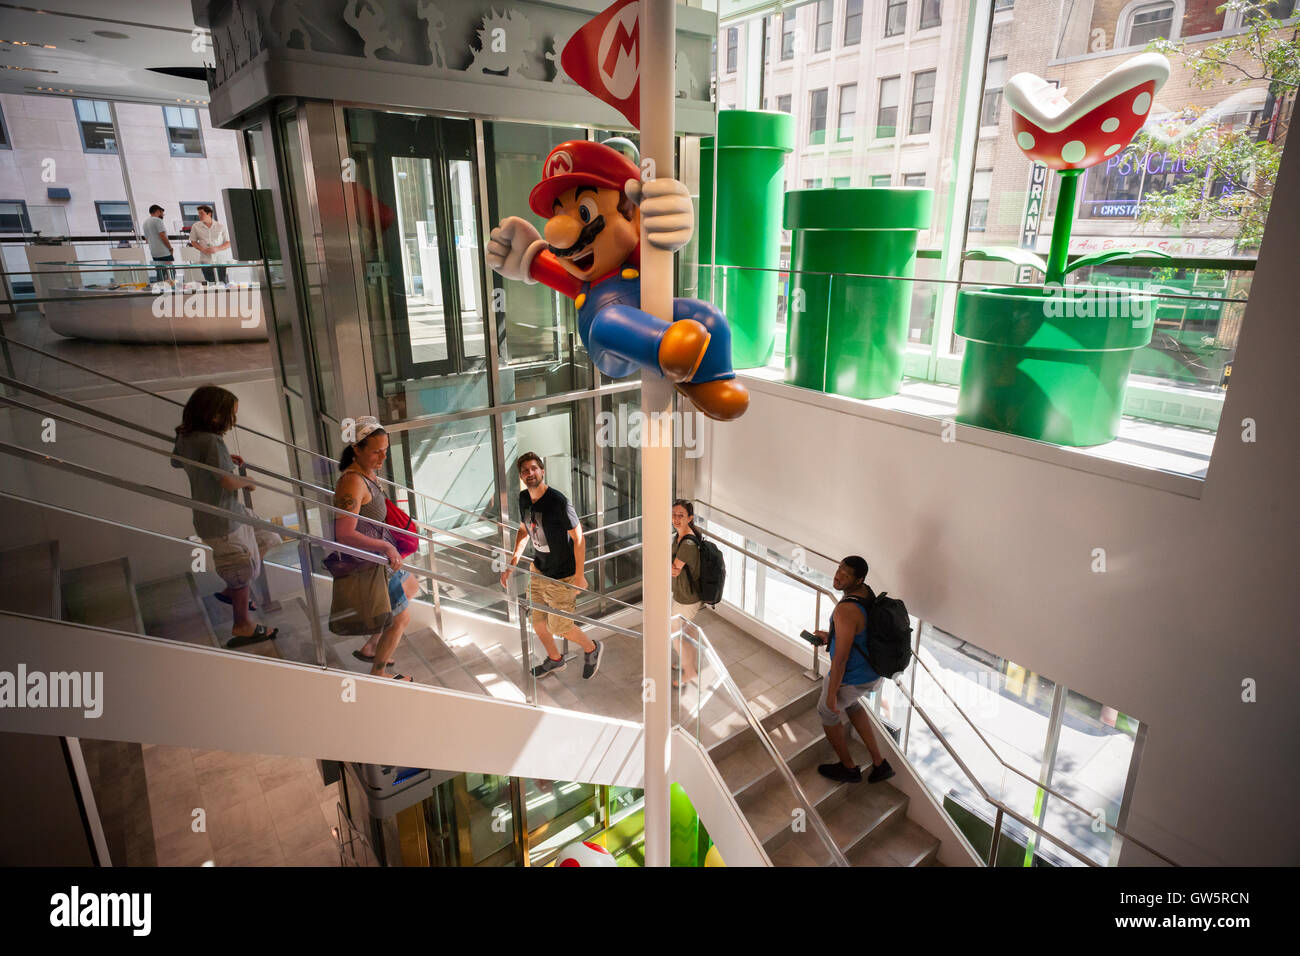 Nintendo Store NYC – A Mix of Museum and Arcade 